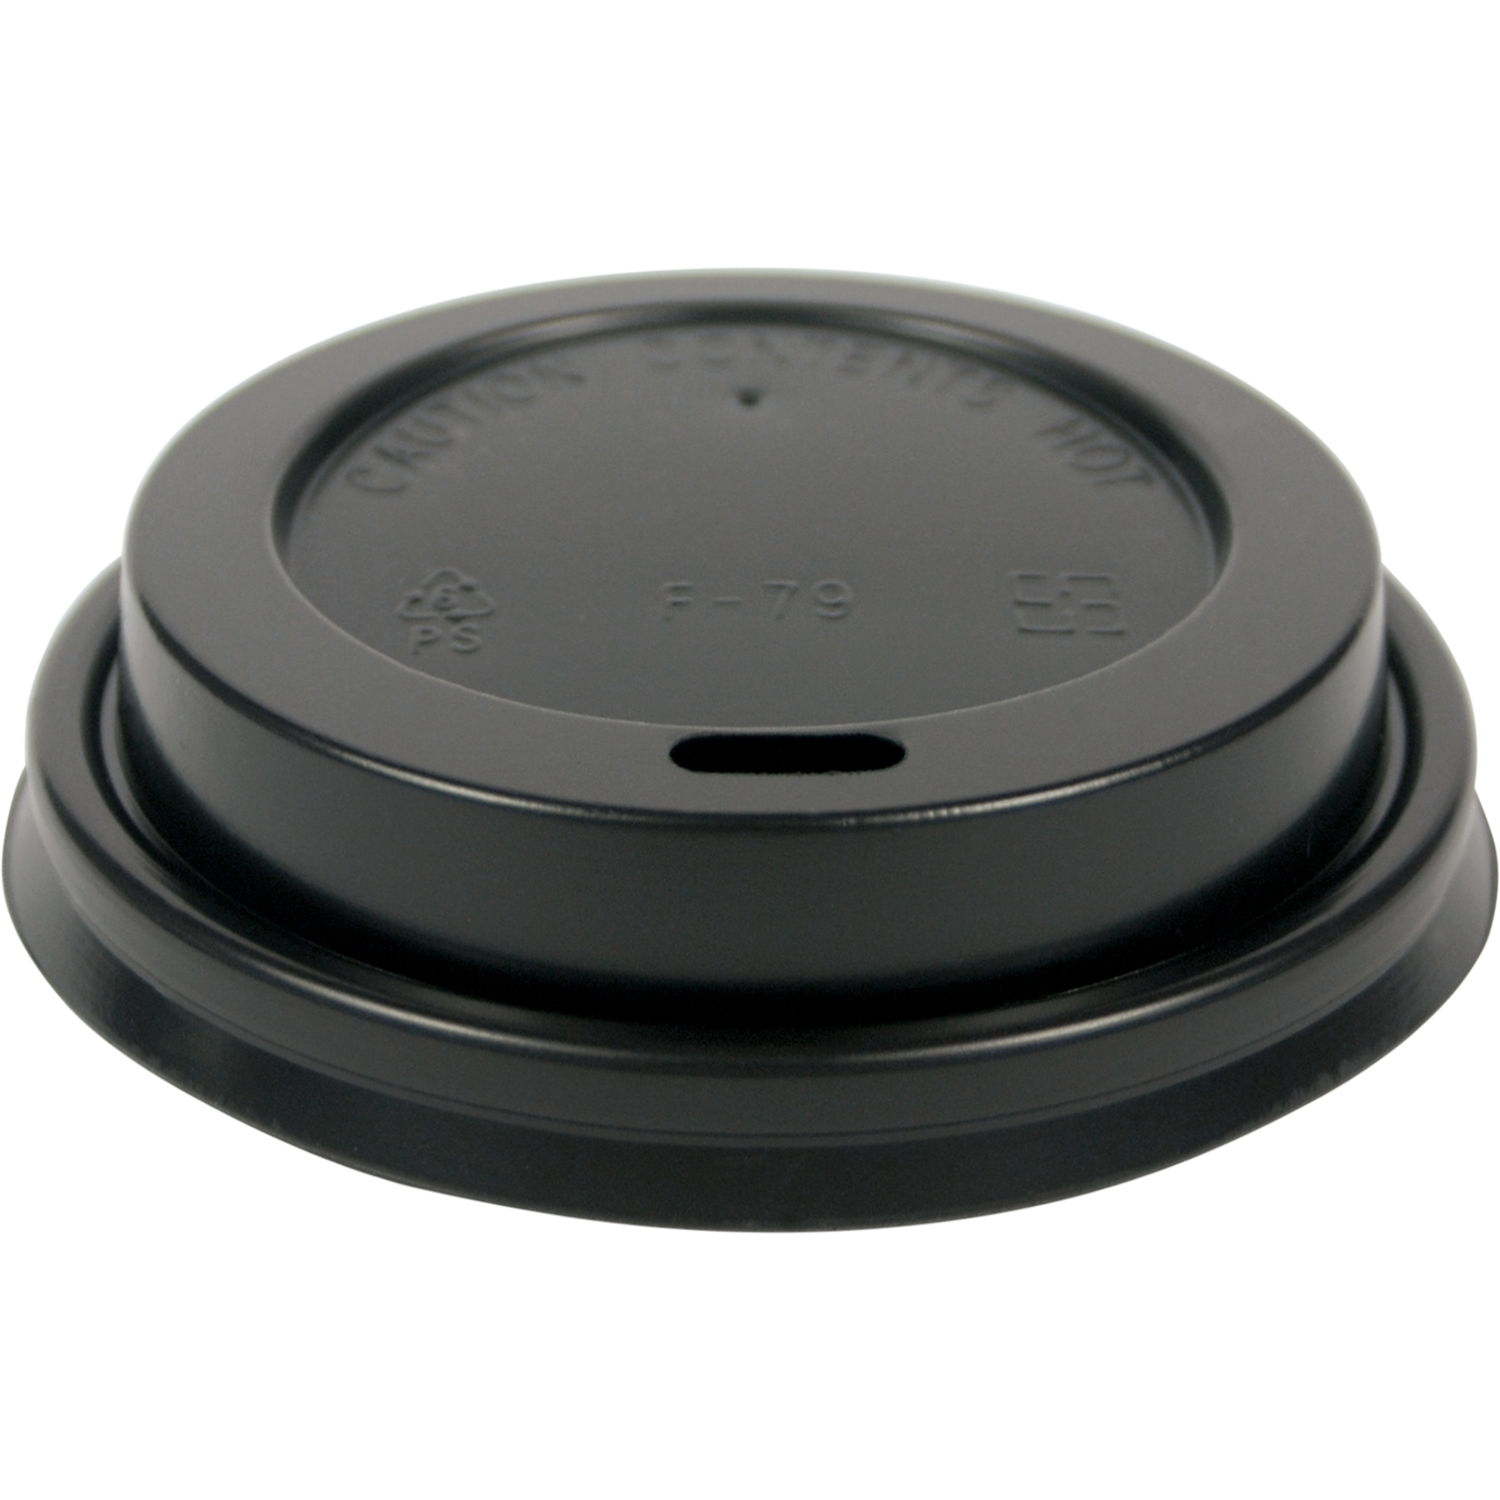 Black Dome Lid for 8oz Hot Cup 1000/case